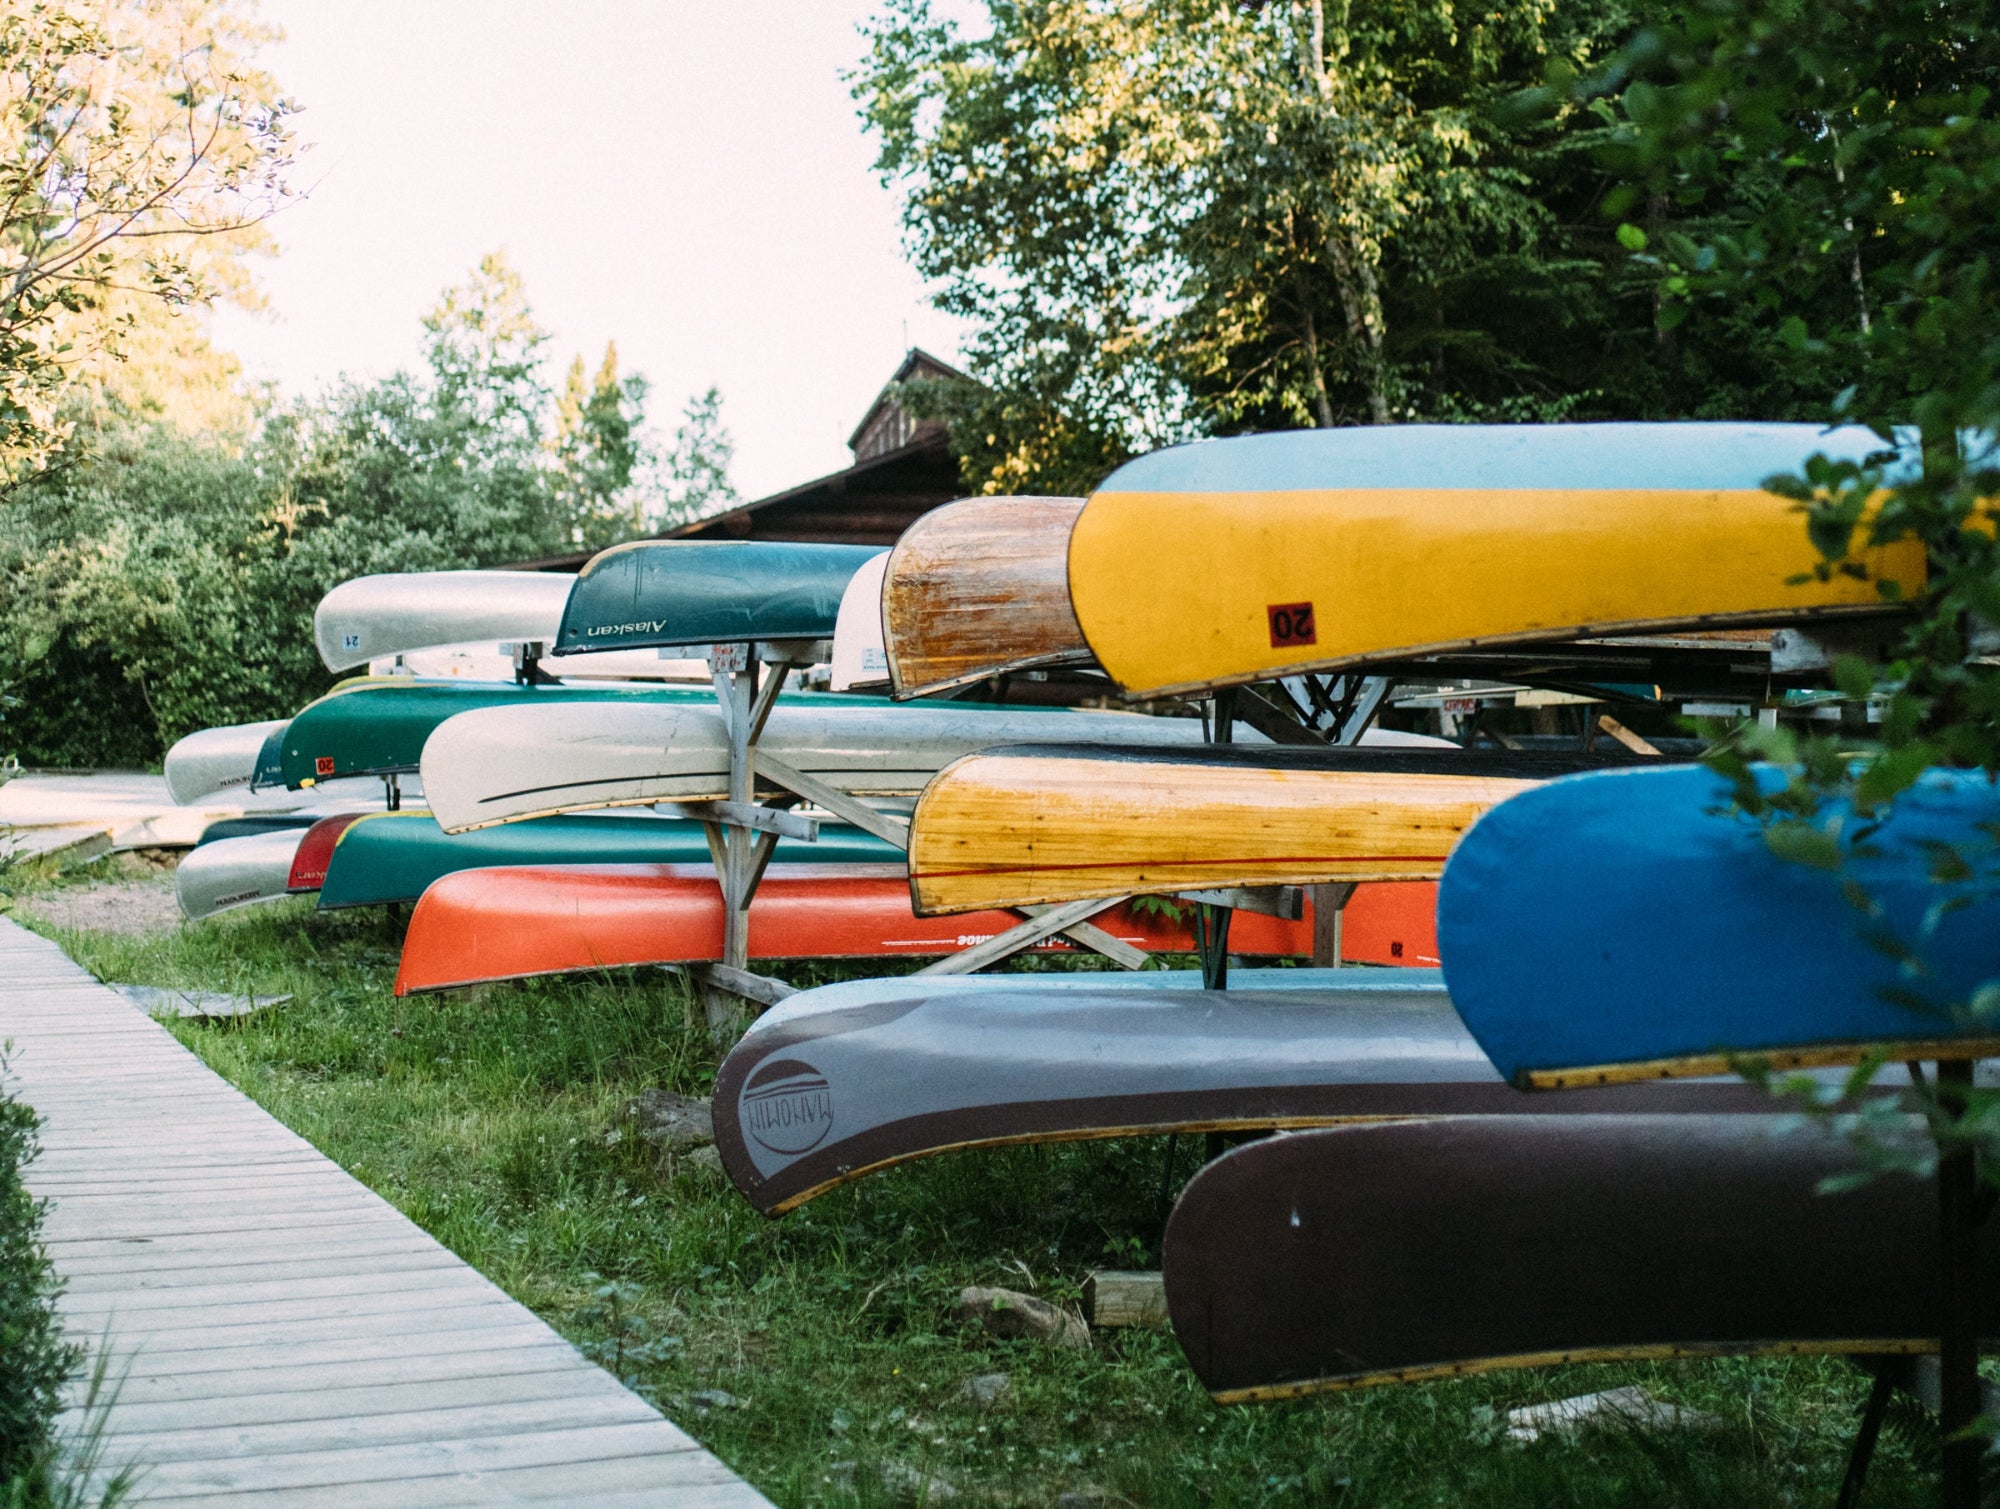 Stacks of canoes are lined up on racks next to a boardwalk